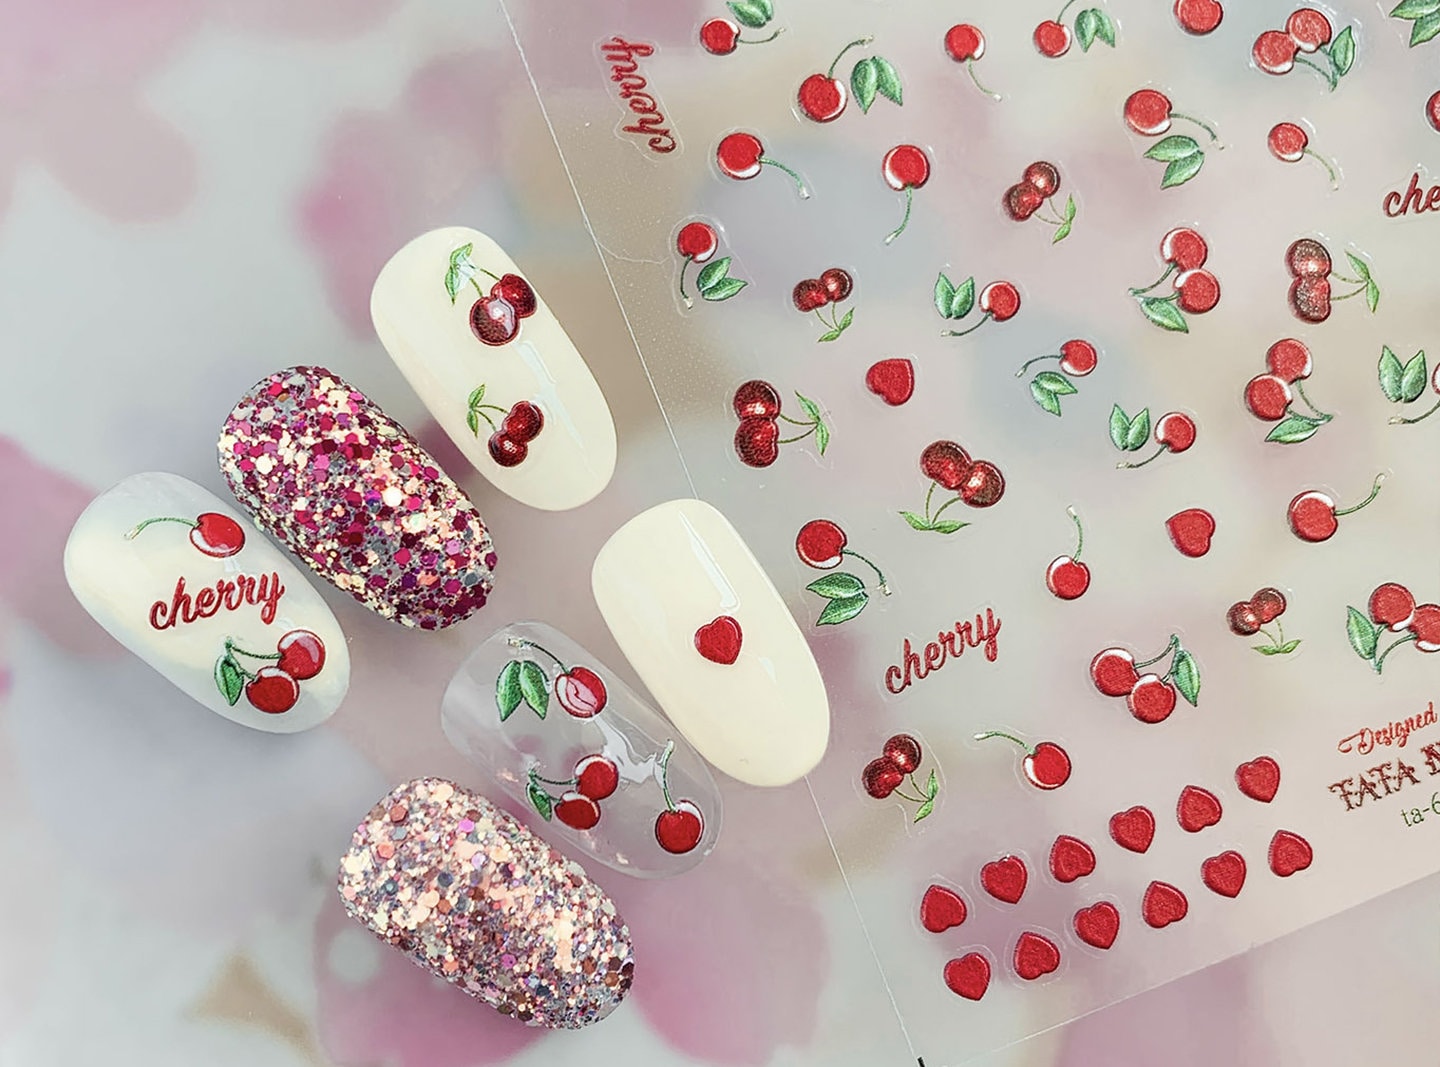 Ayyufe Nail Sticker Easy to Apply Exquisite Pattern Delicate Fruit Style  Delicate Adhesive Nail Art Stickers 